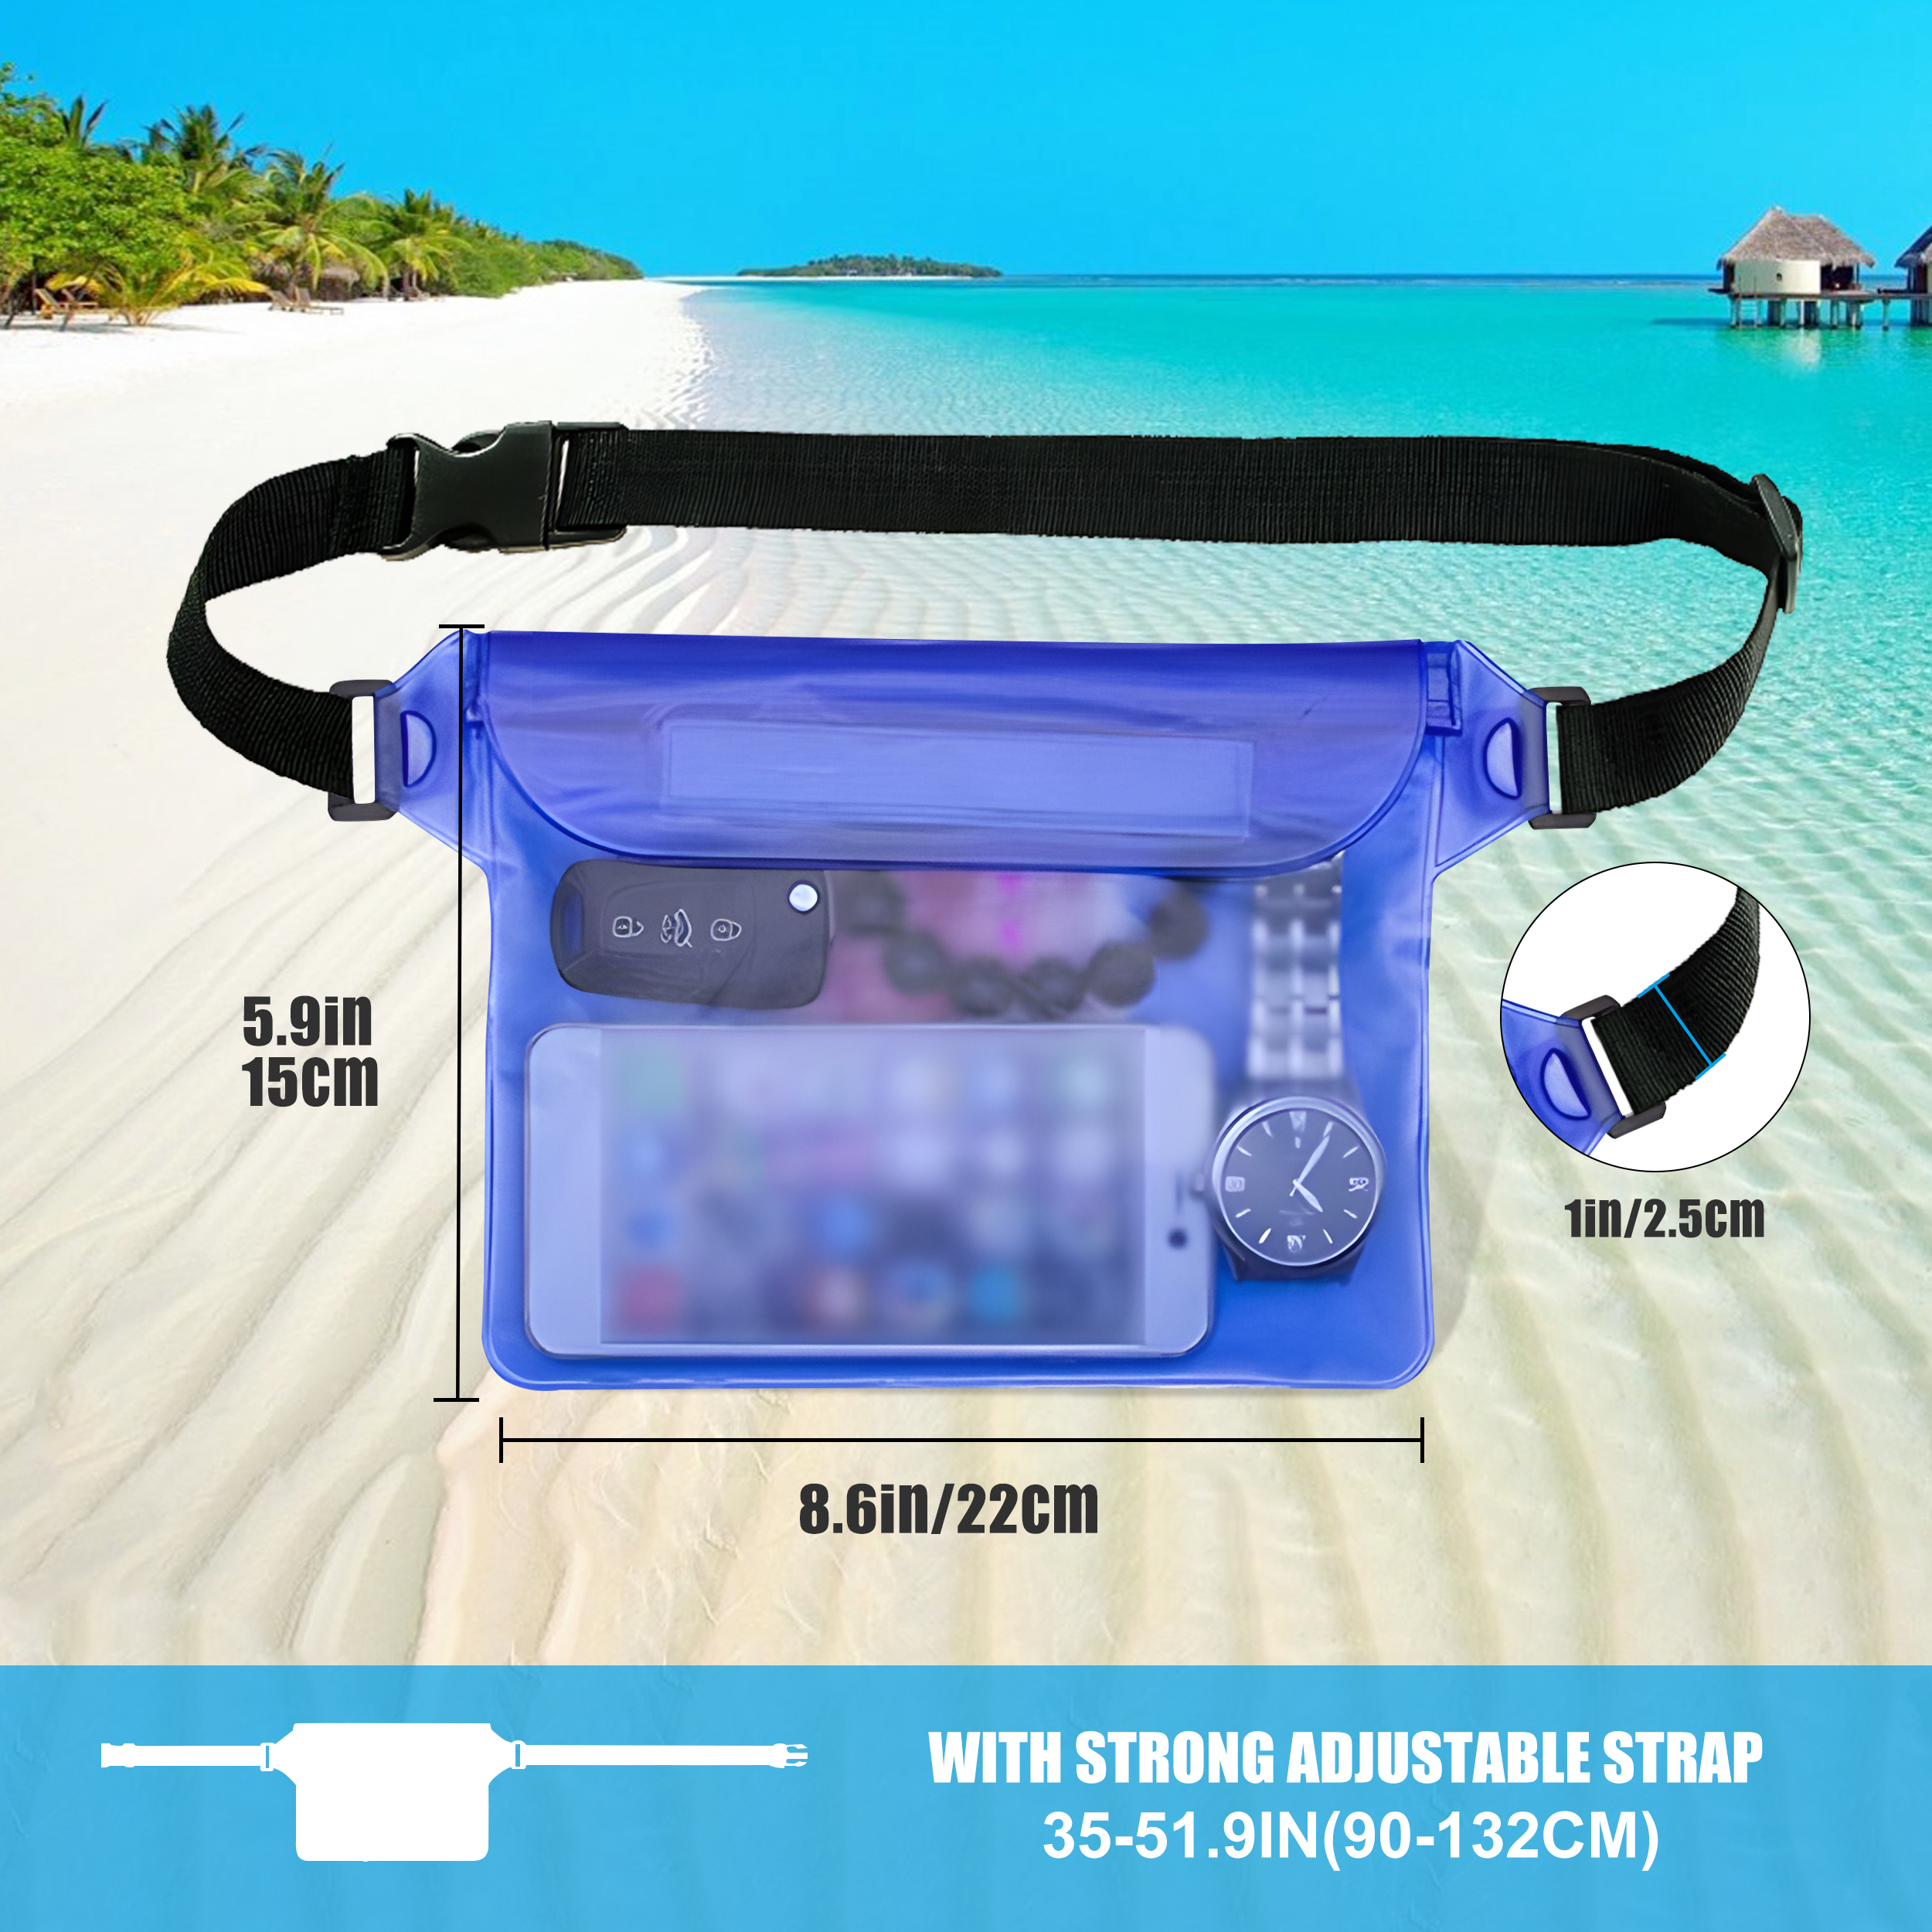 2pcs universal water mobile phone bags & cases,waterproof phone case pouch for boating swimming beach swimming pool